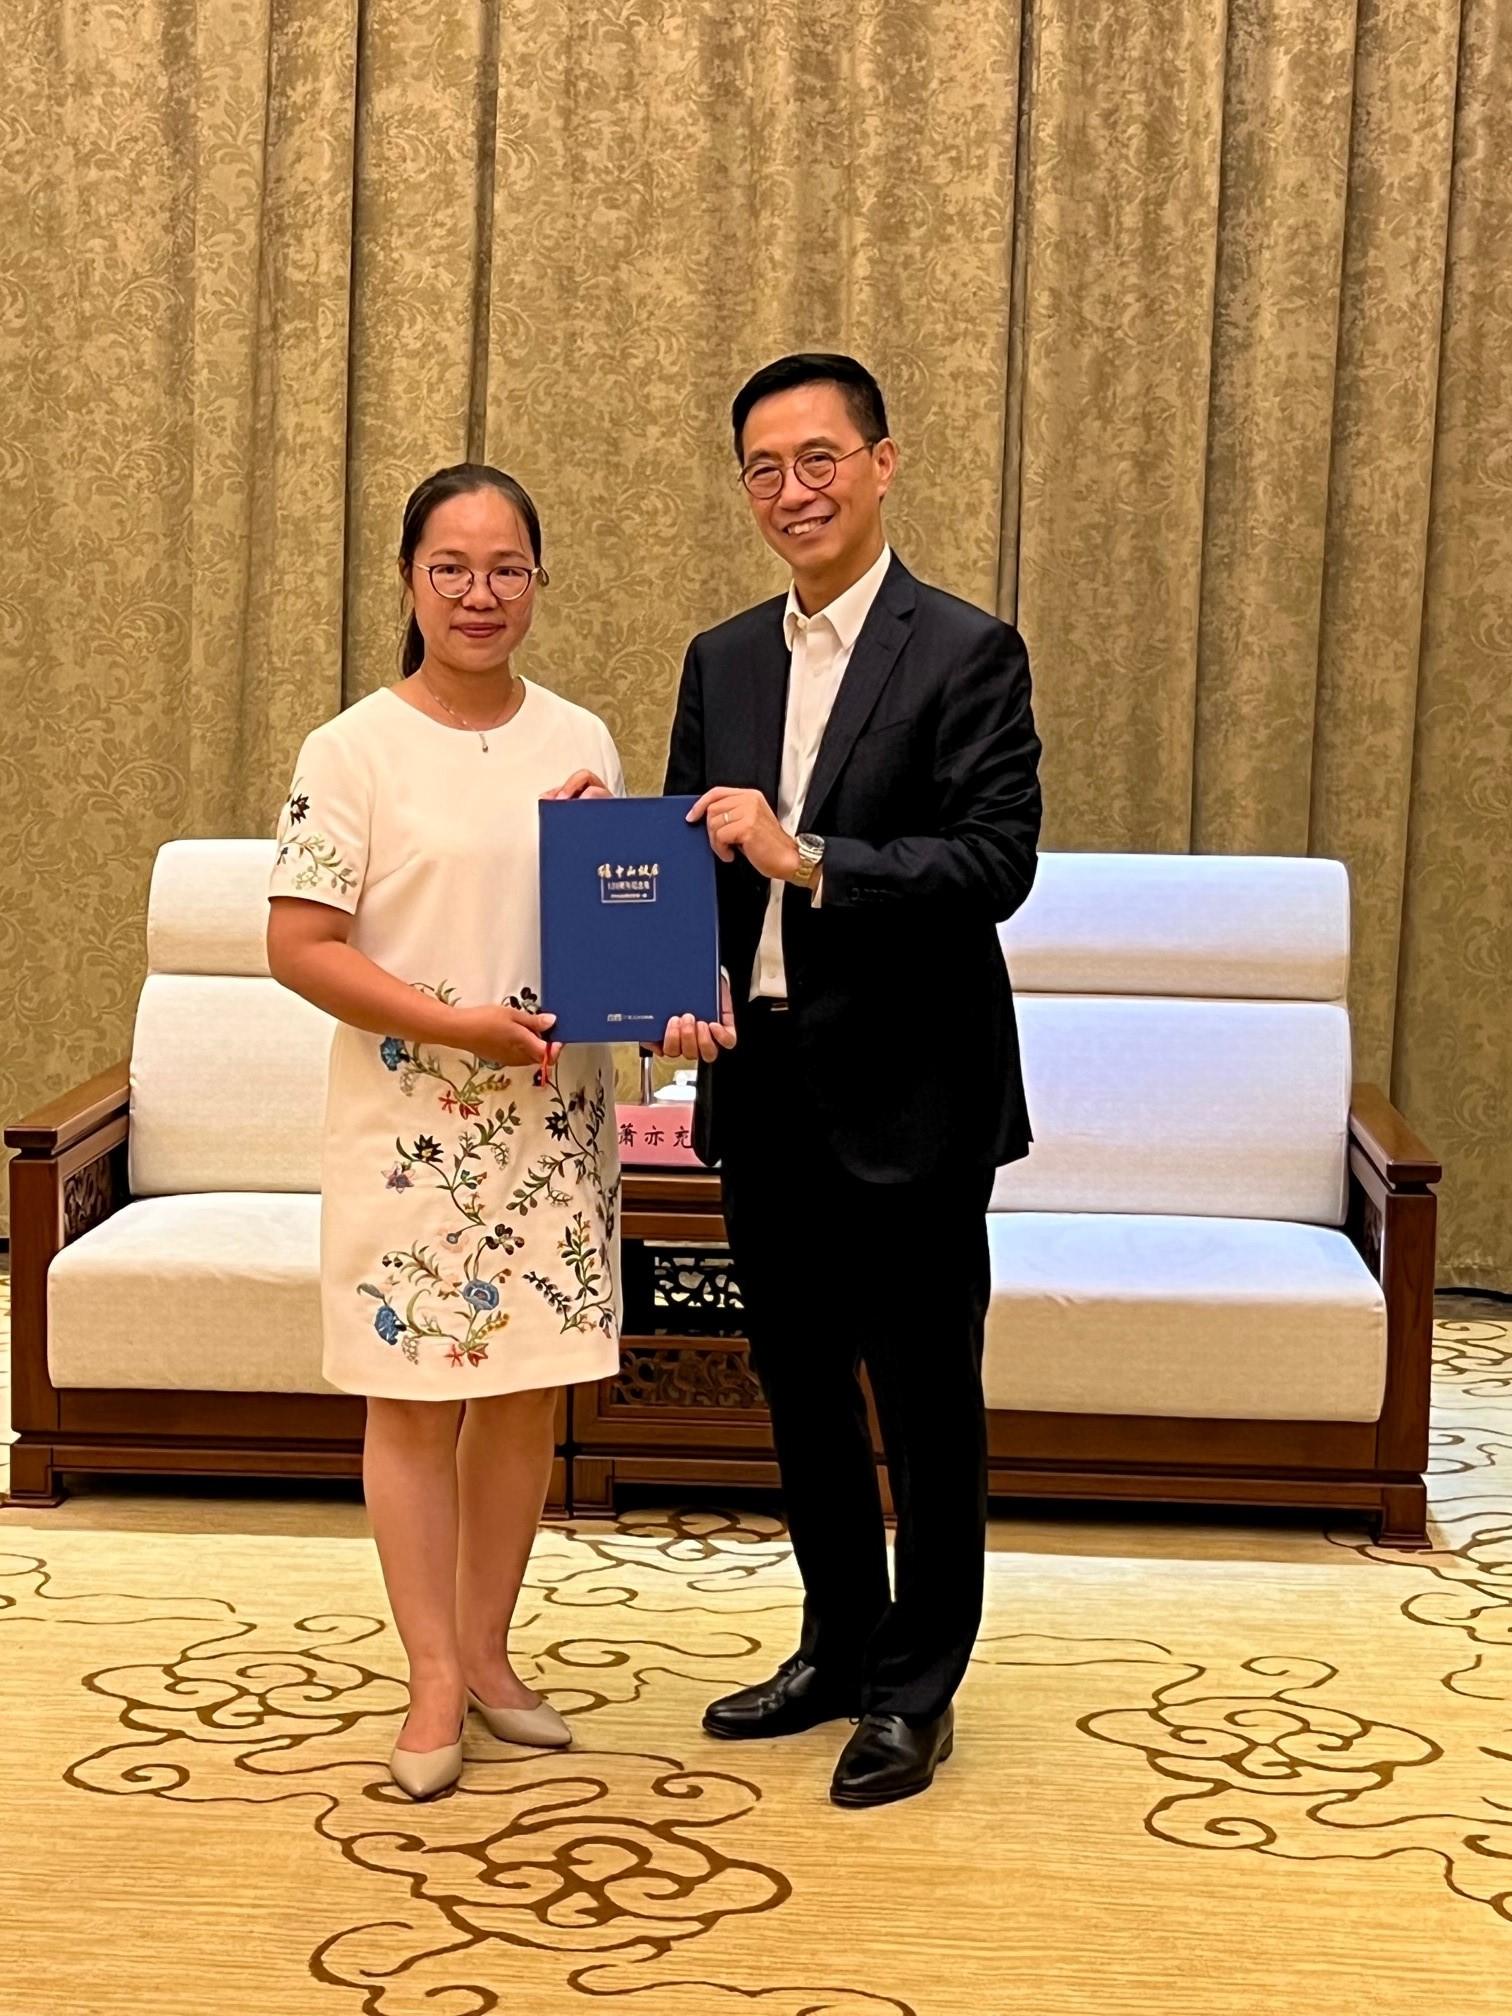 The Secretary for Culture, Sports and Tourism, Mr Kevin Yeung (right), yesterday (June 26) calls on the Director of the Zhongshan Culture, Radio, Television and Tourism Bureau, Ms Xiao Yichong (left), to exchange views on collaboration in the areas of culture and tourism.
